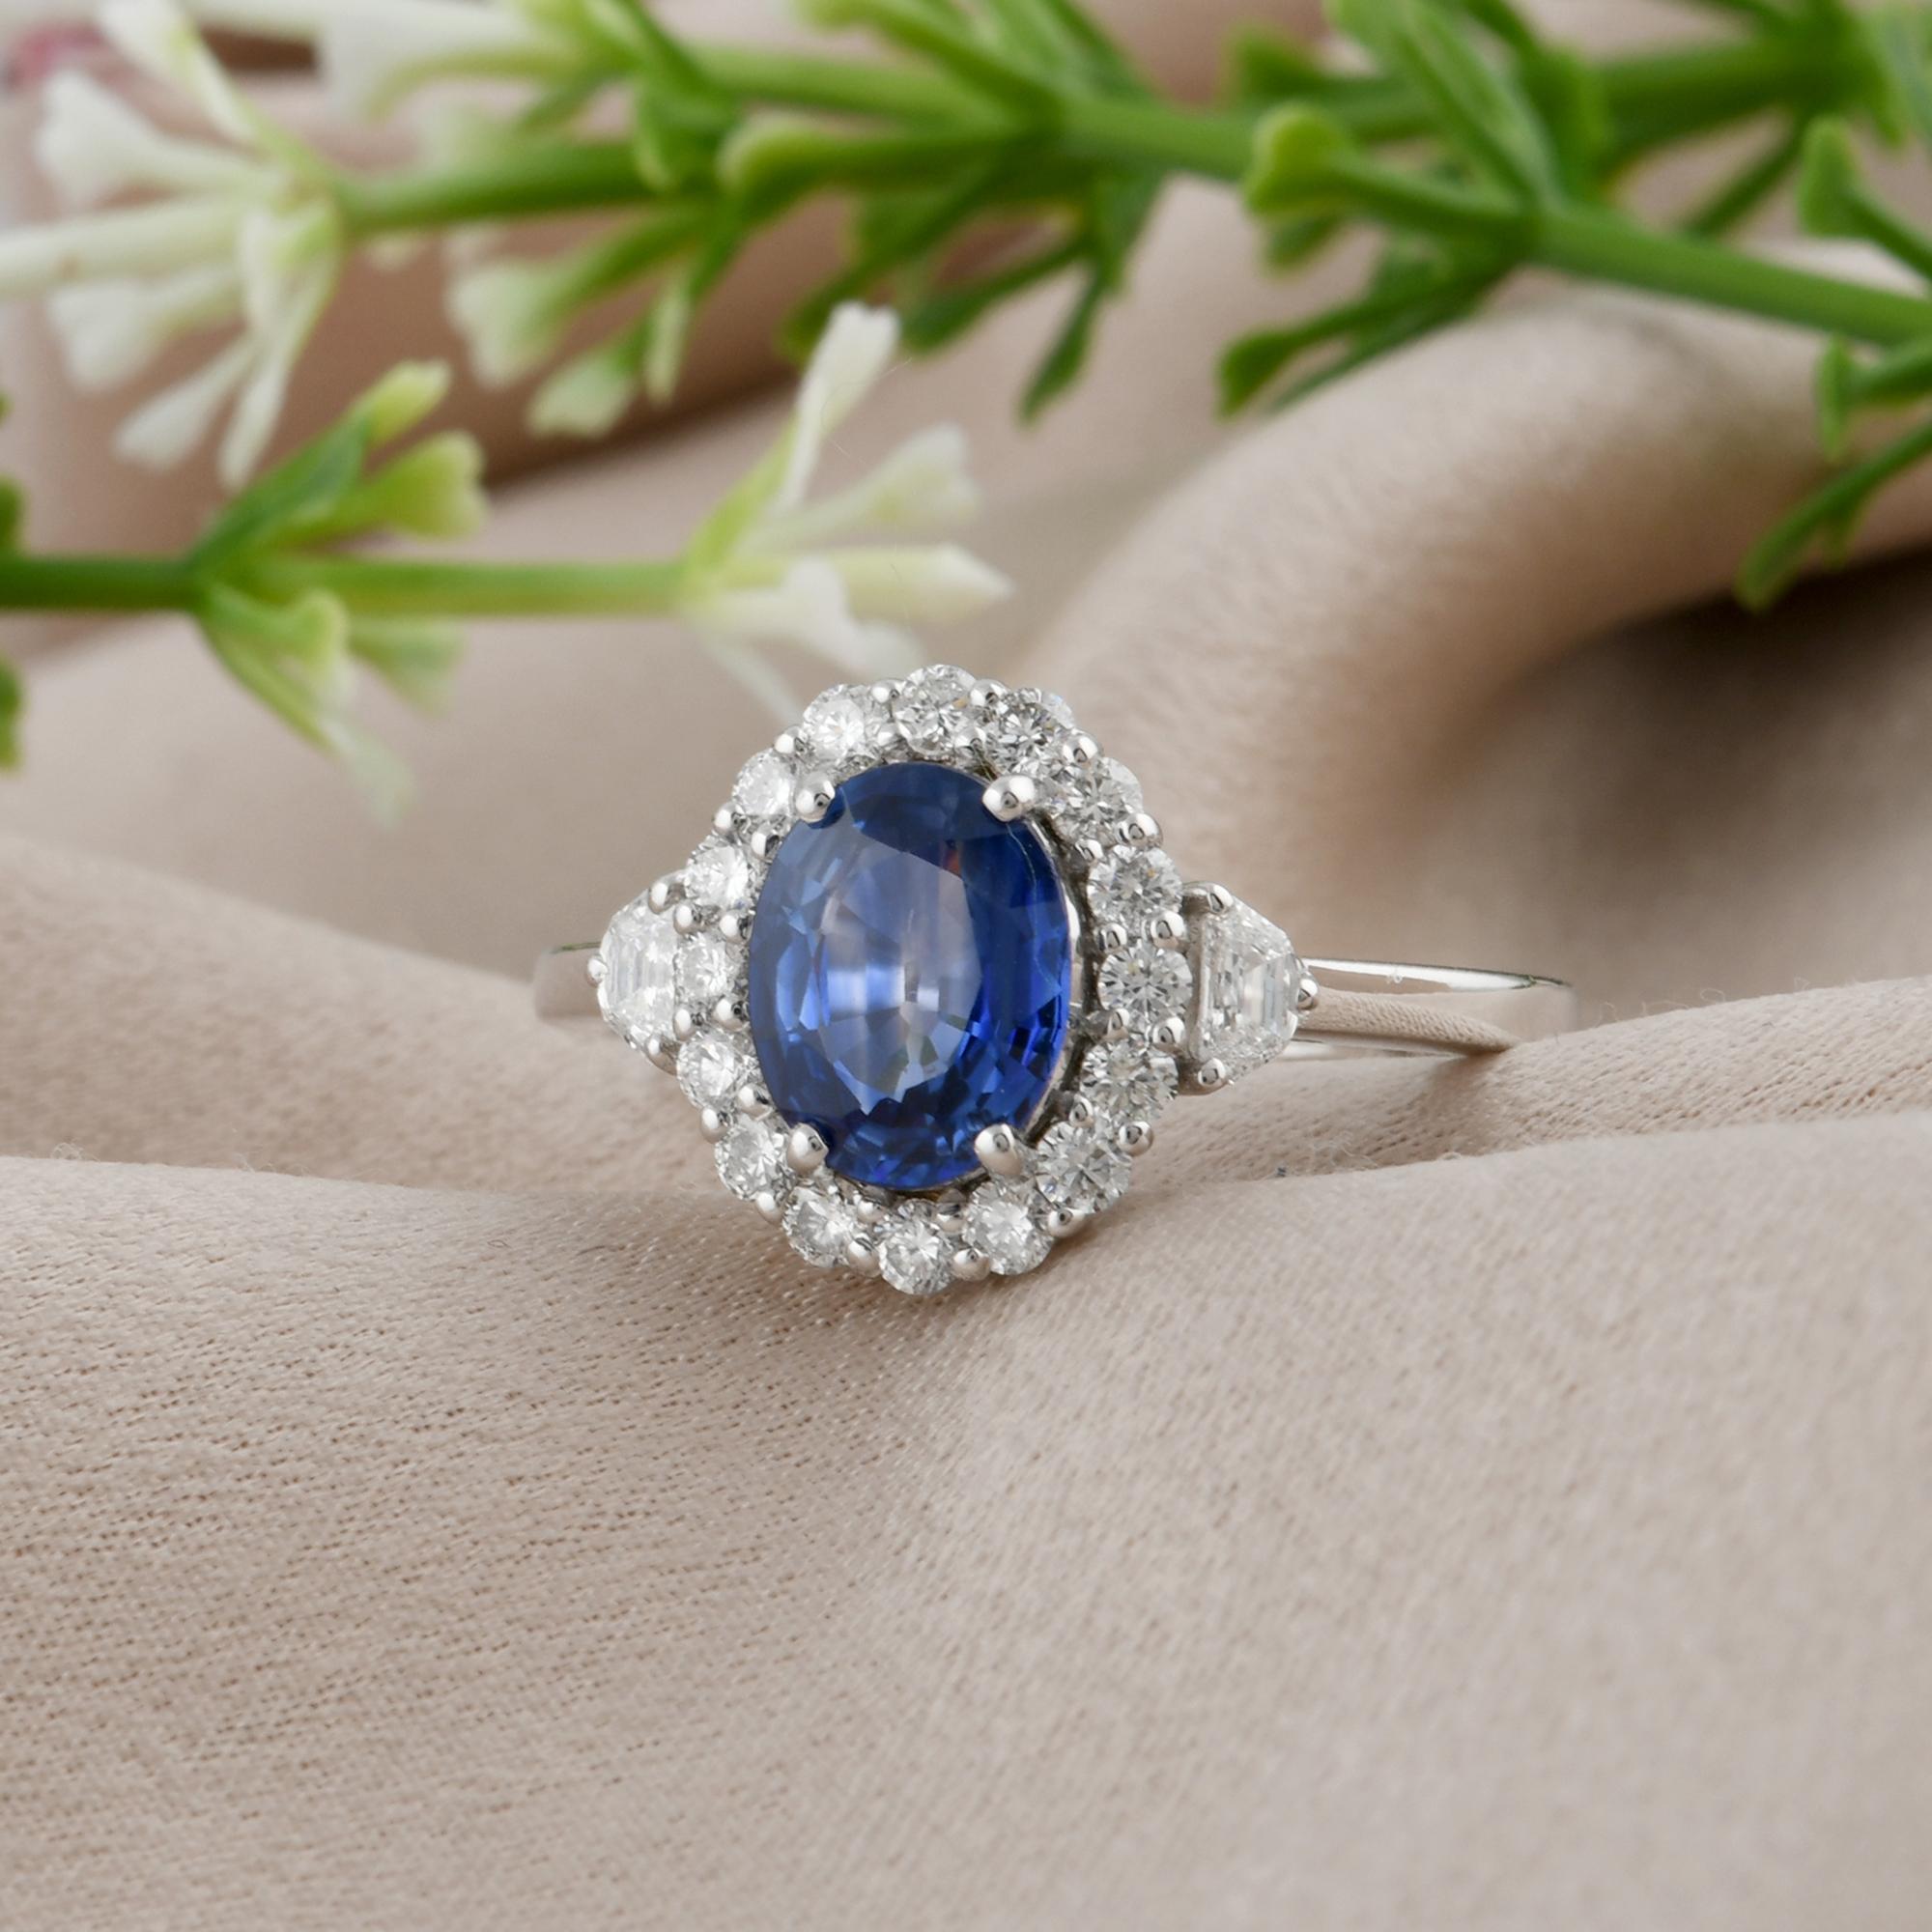 Oval Cut Oval Blue Sapphire Gemstone Cocktail Ring Diamond 14 Karat White Gold Jewelry For Sale